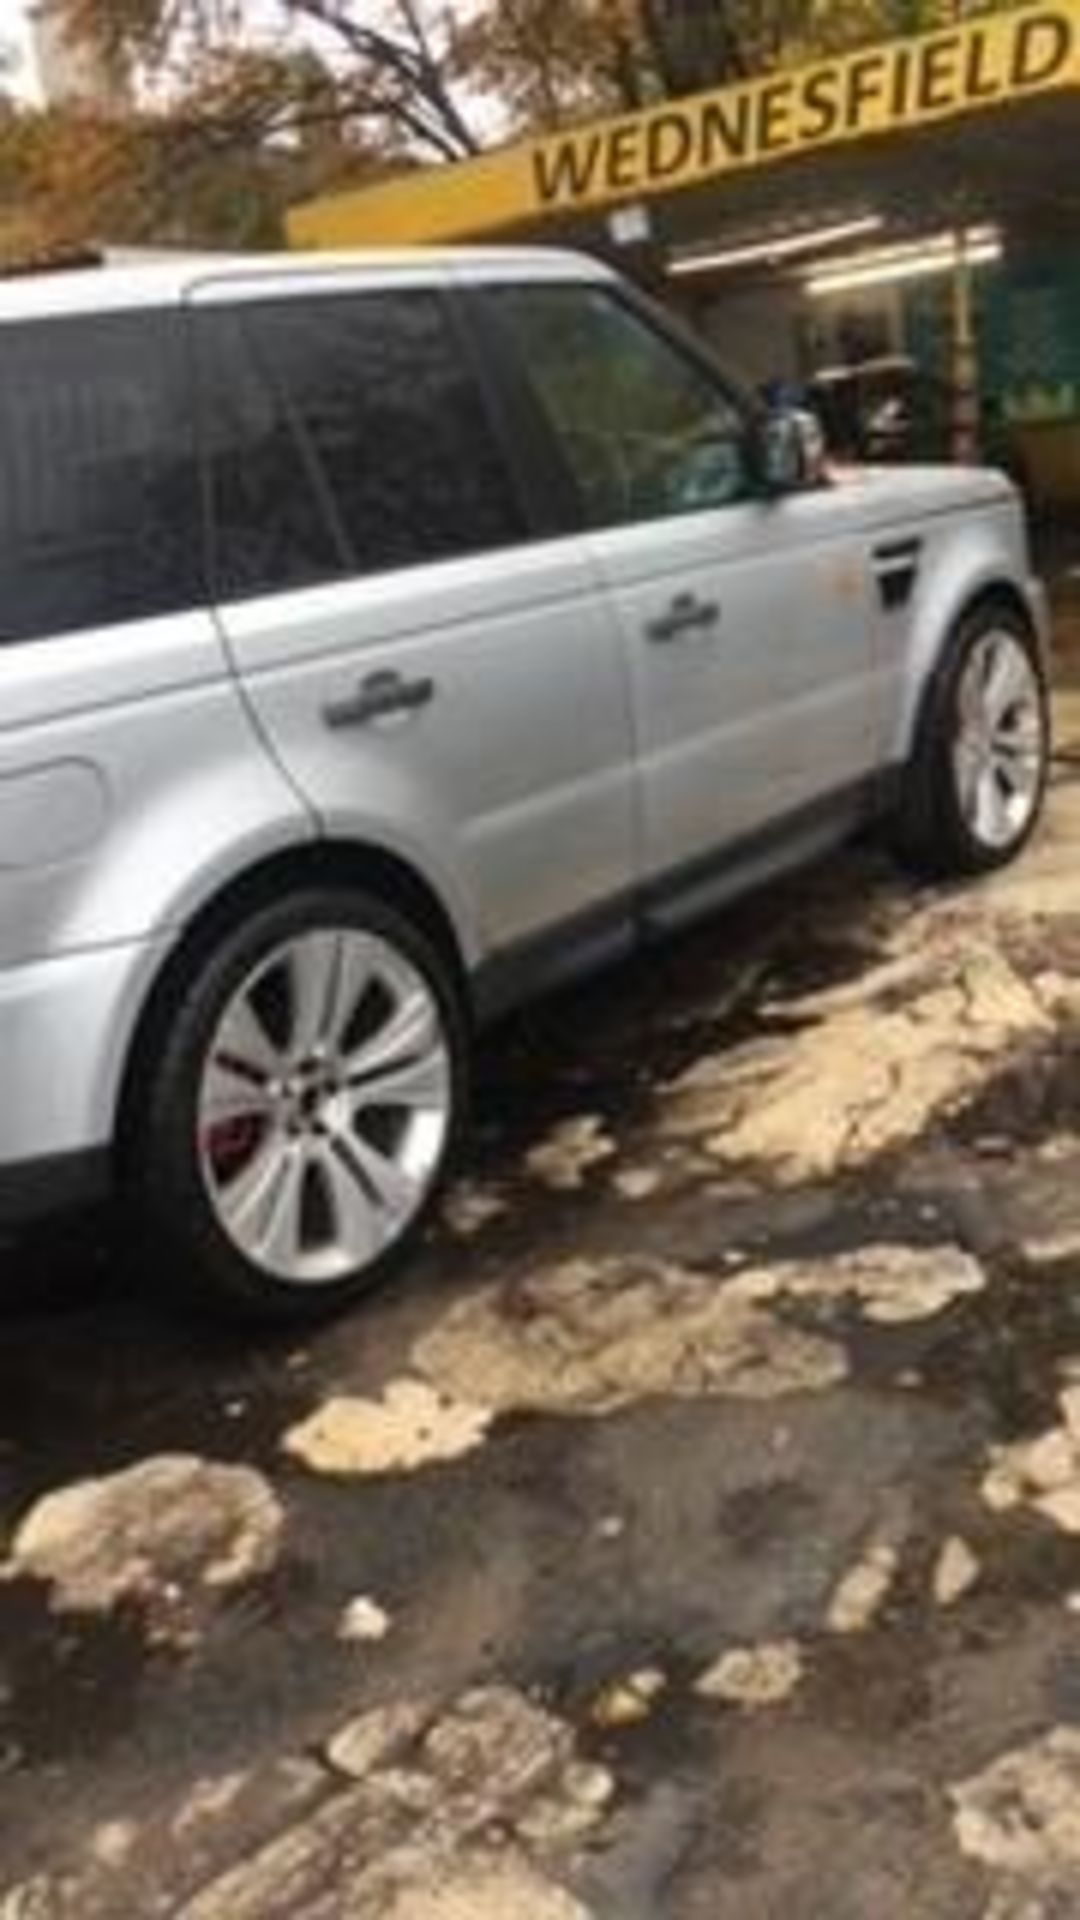 LAND ROVER RANGE ROVER 56 PLATE - Image 2 of 10